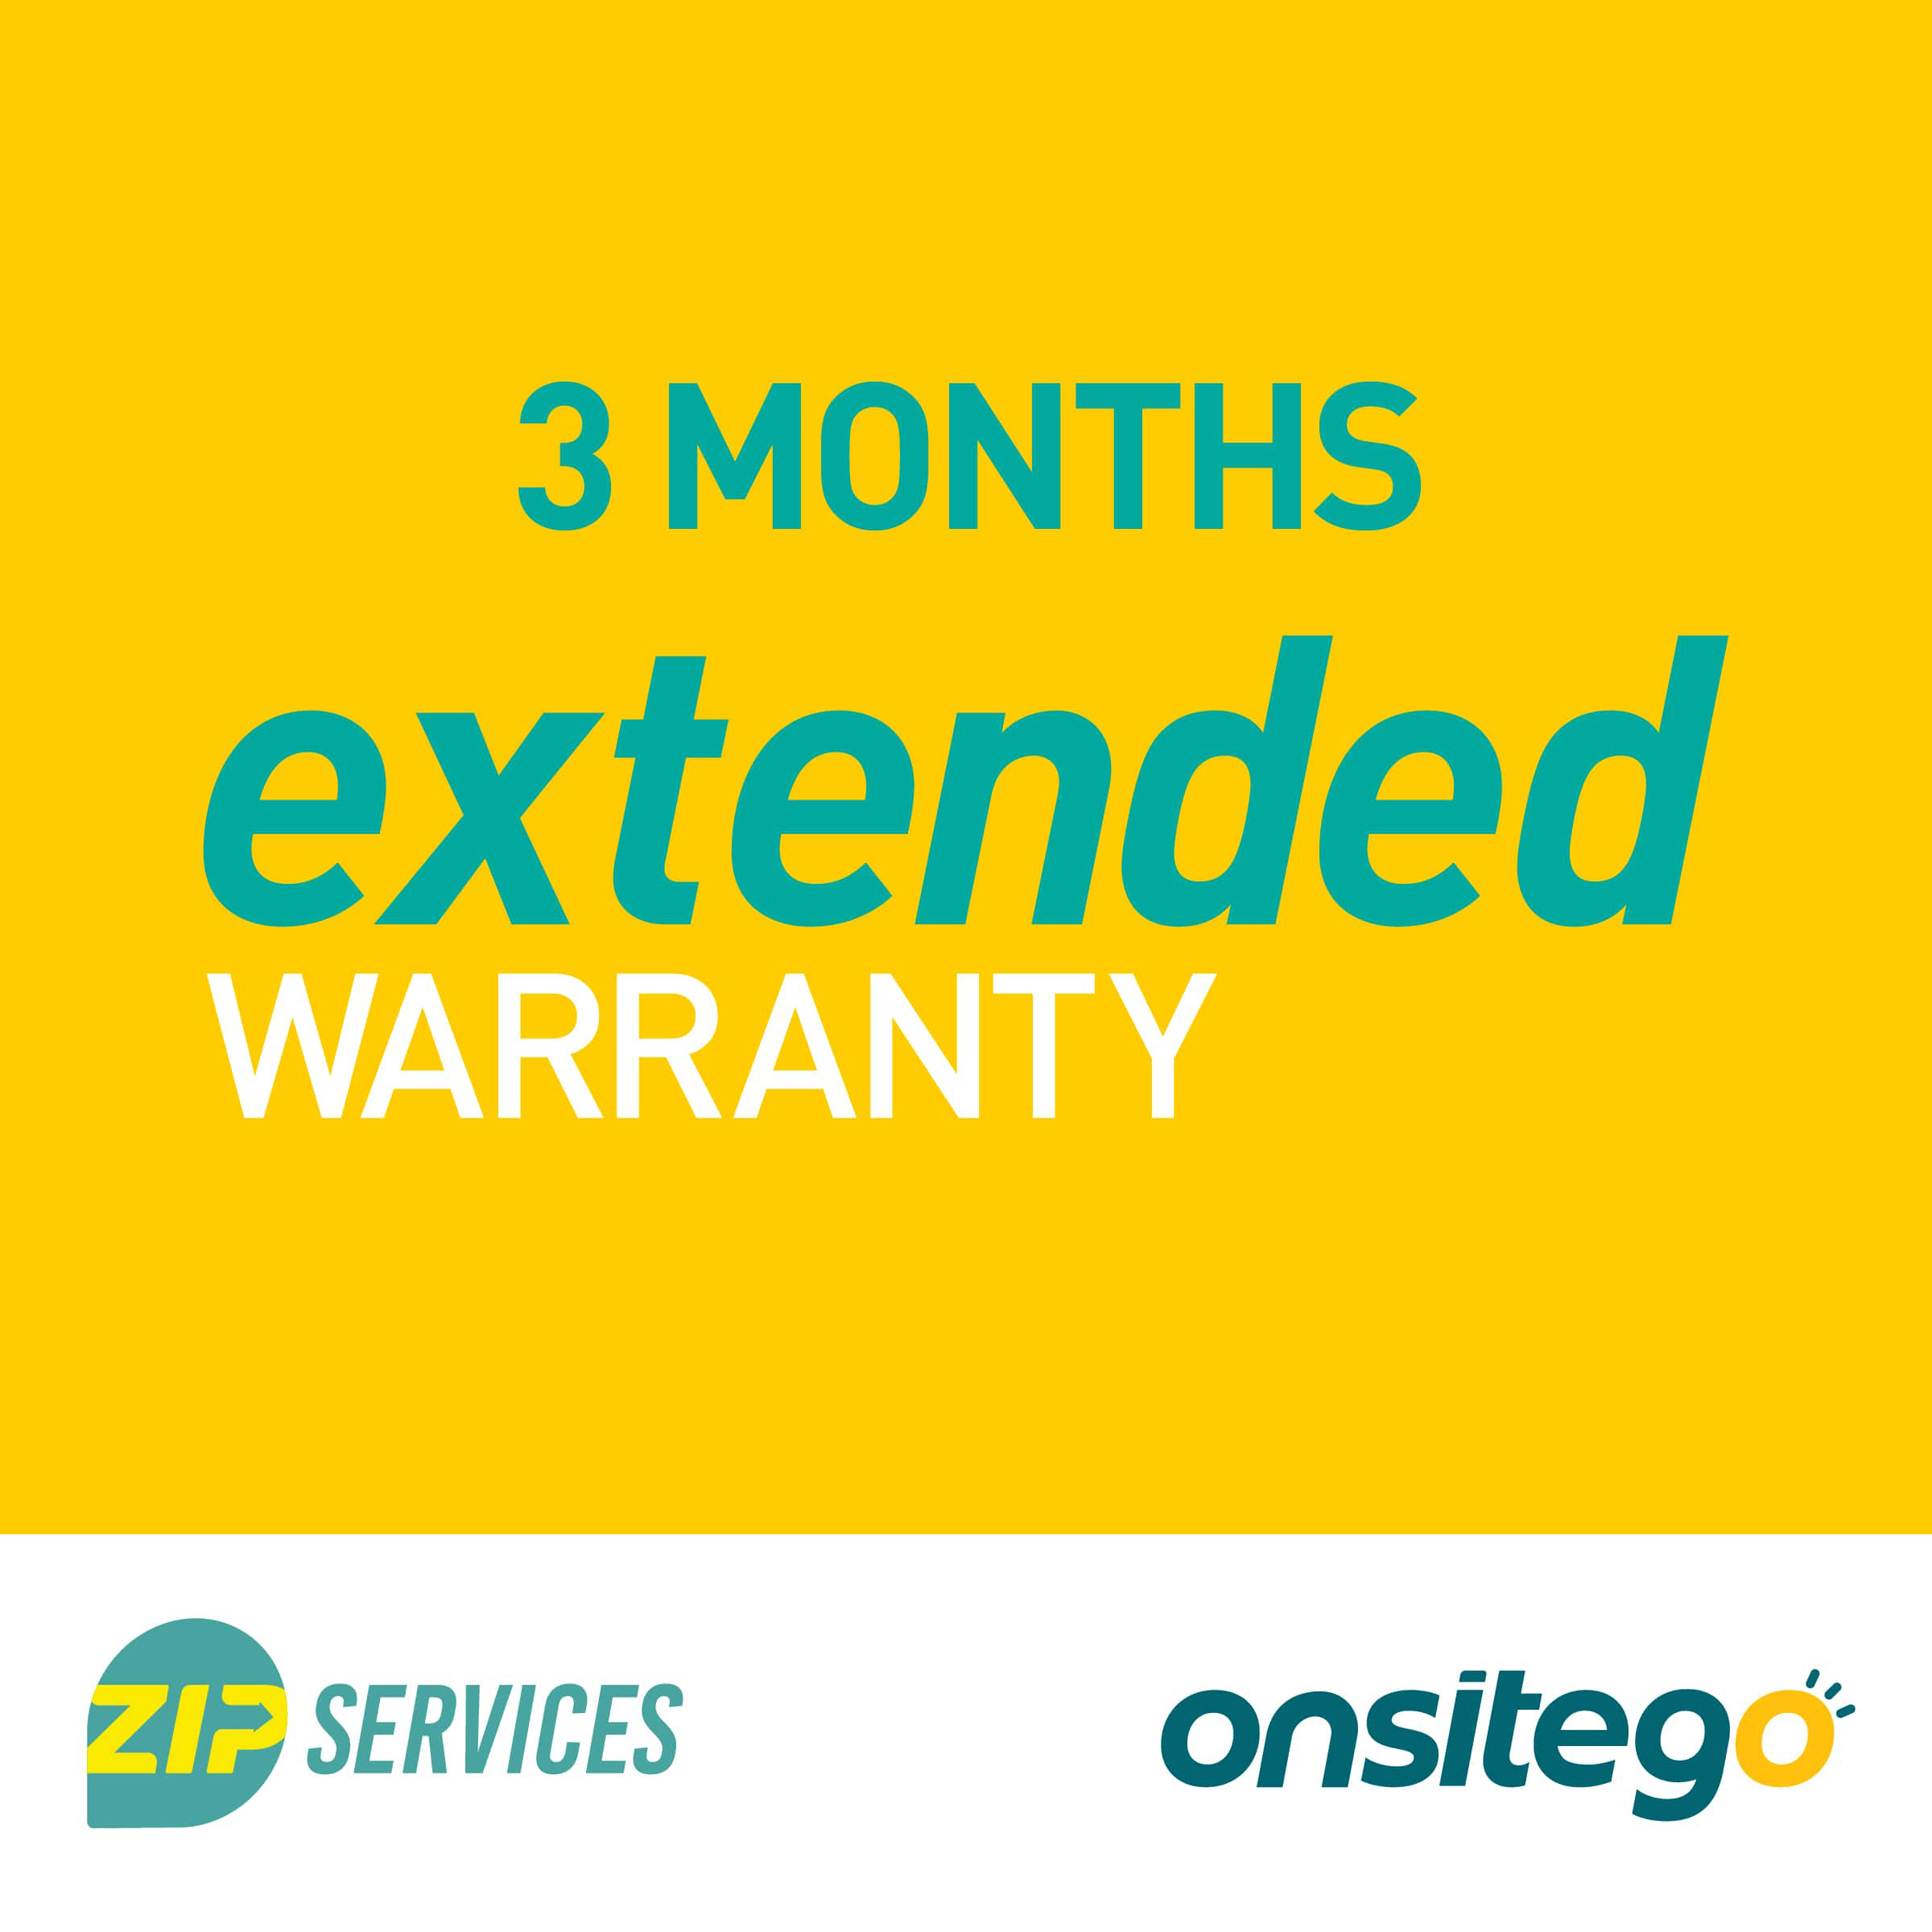 OnsiteGo 3 Months Extended Warranty for Mobile Accessory  Rs.1001 - Rs.1500_1